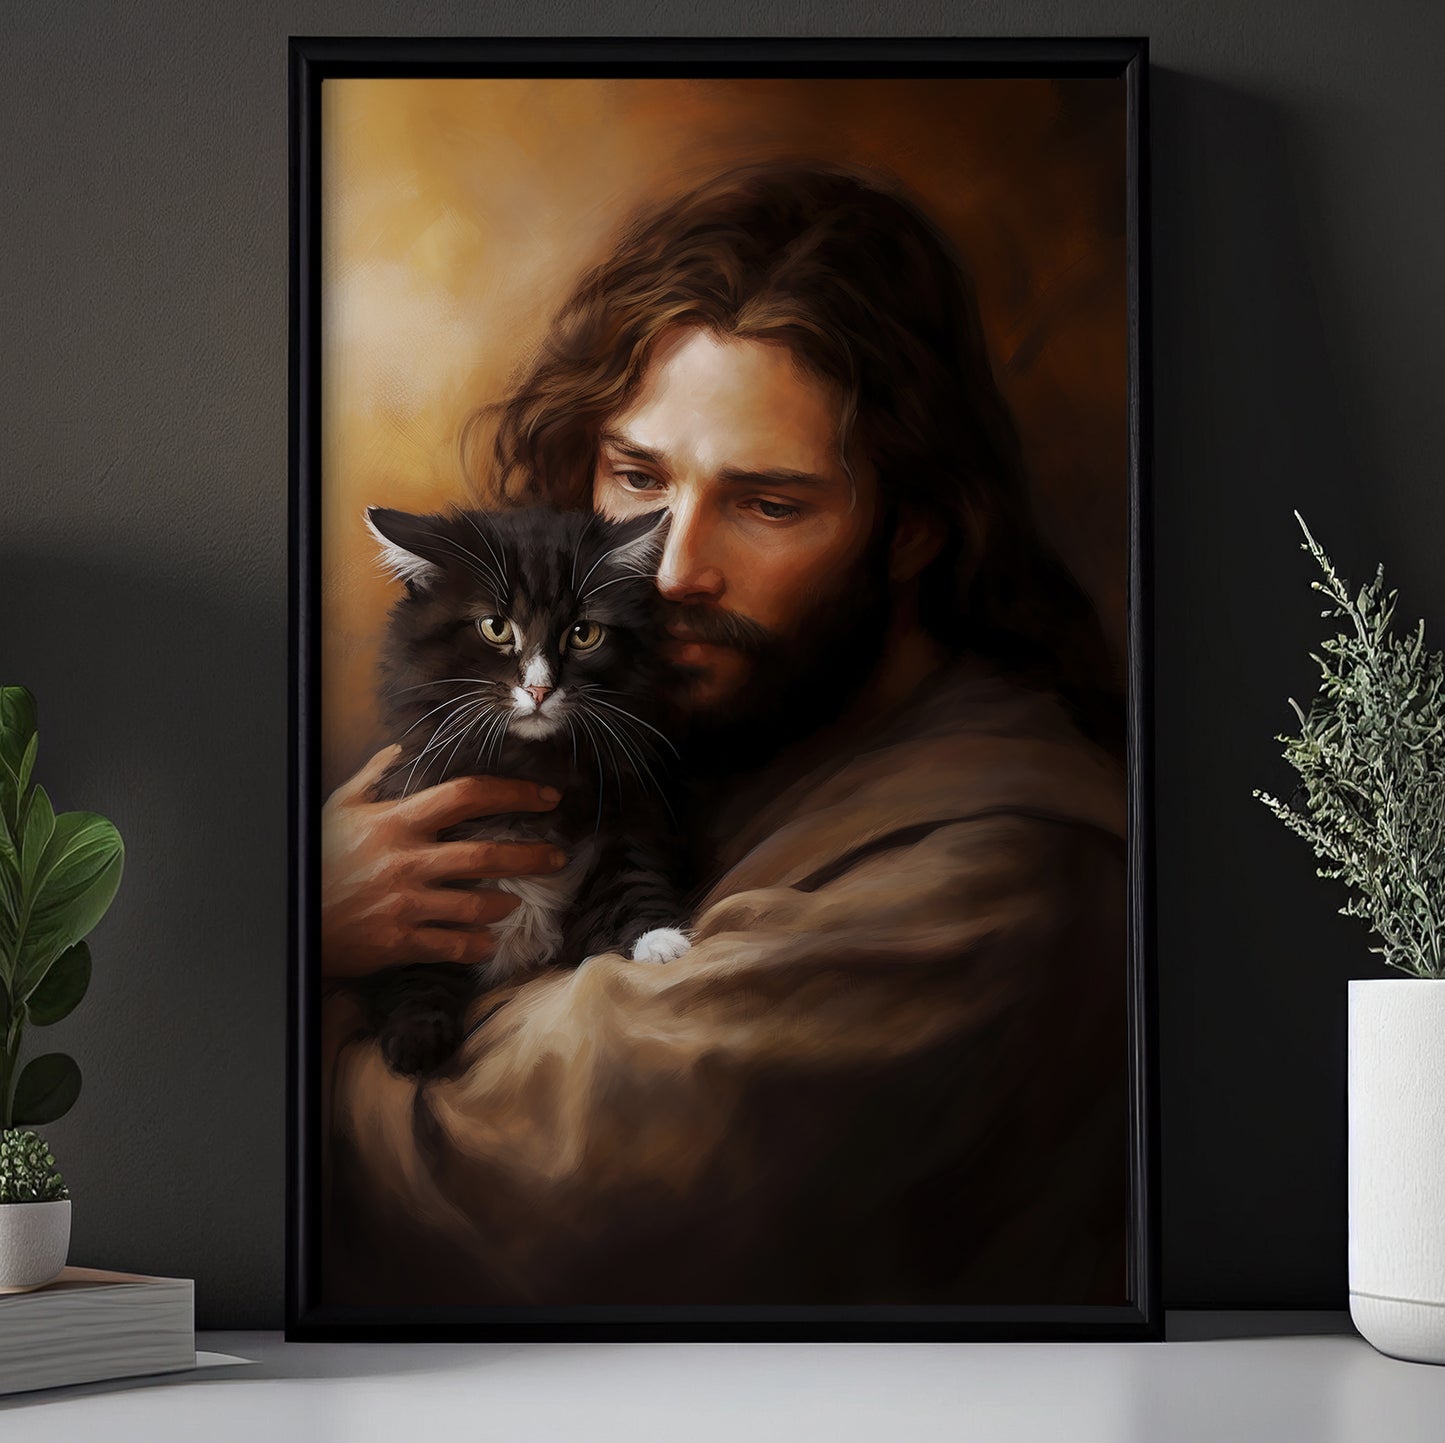 Kindness in Gentle Hold, Jesus Christian Canvas Painting, Xmas Wall Art Decor - Christmas Poster Gift For Cat Lovers